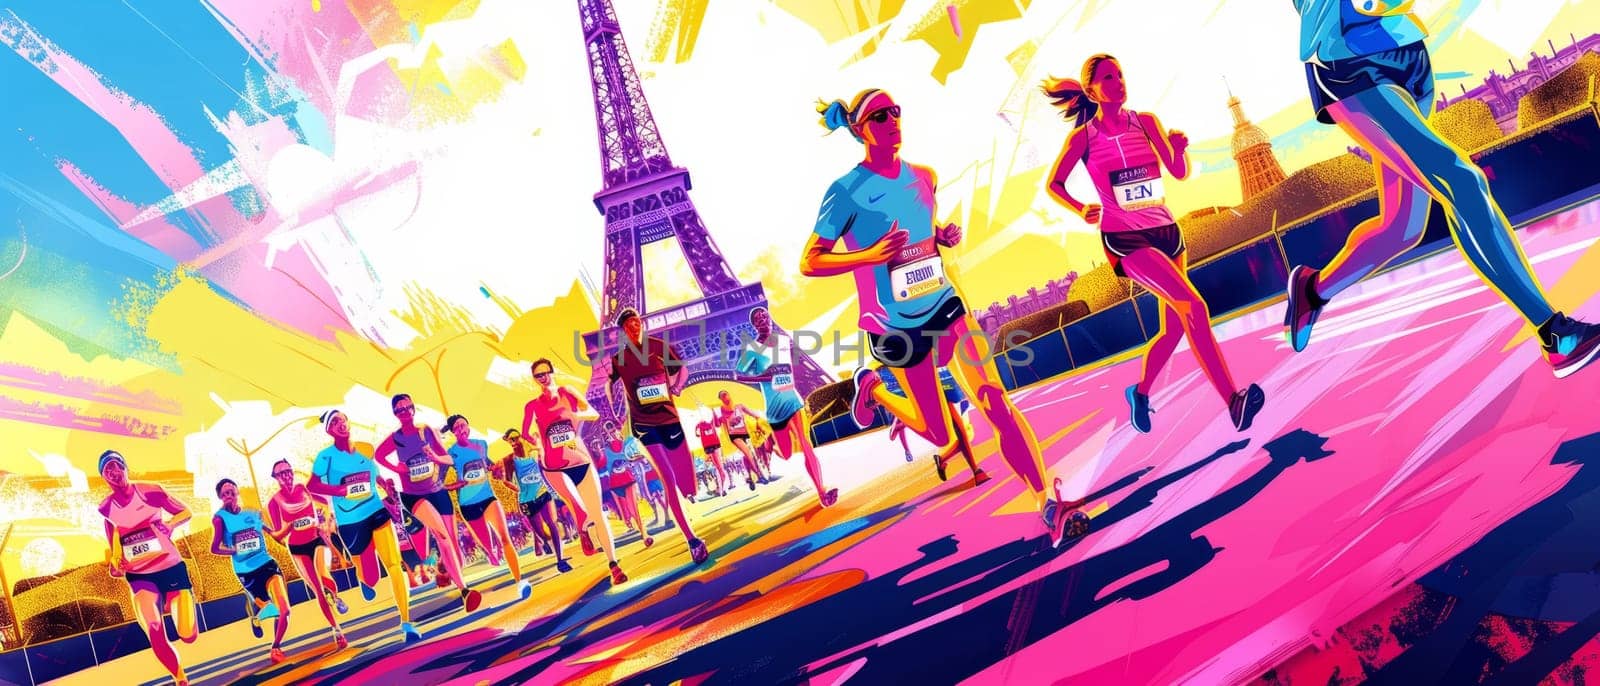 Dynamic illustration of marathon runners in vivid colors with the Eiffel Tower in the background, conveying movement and energy